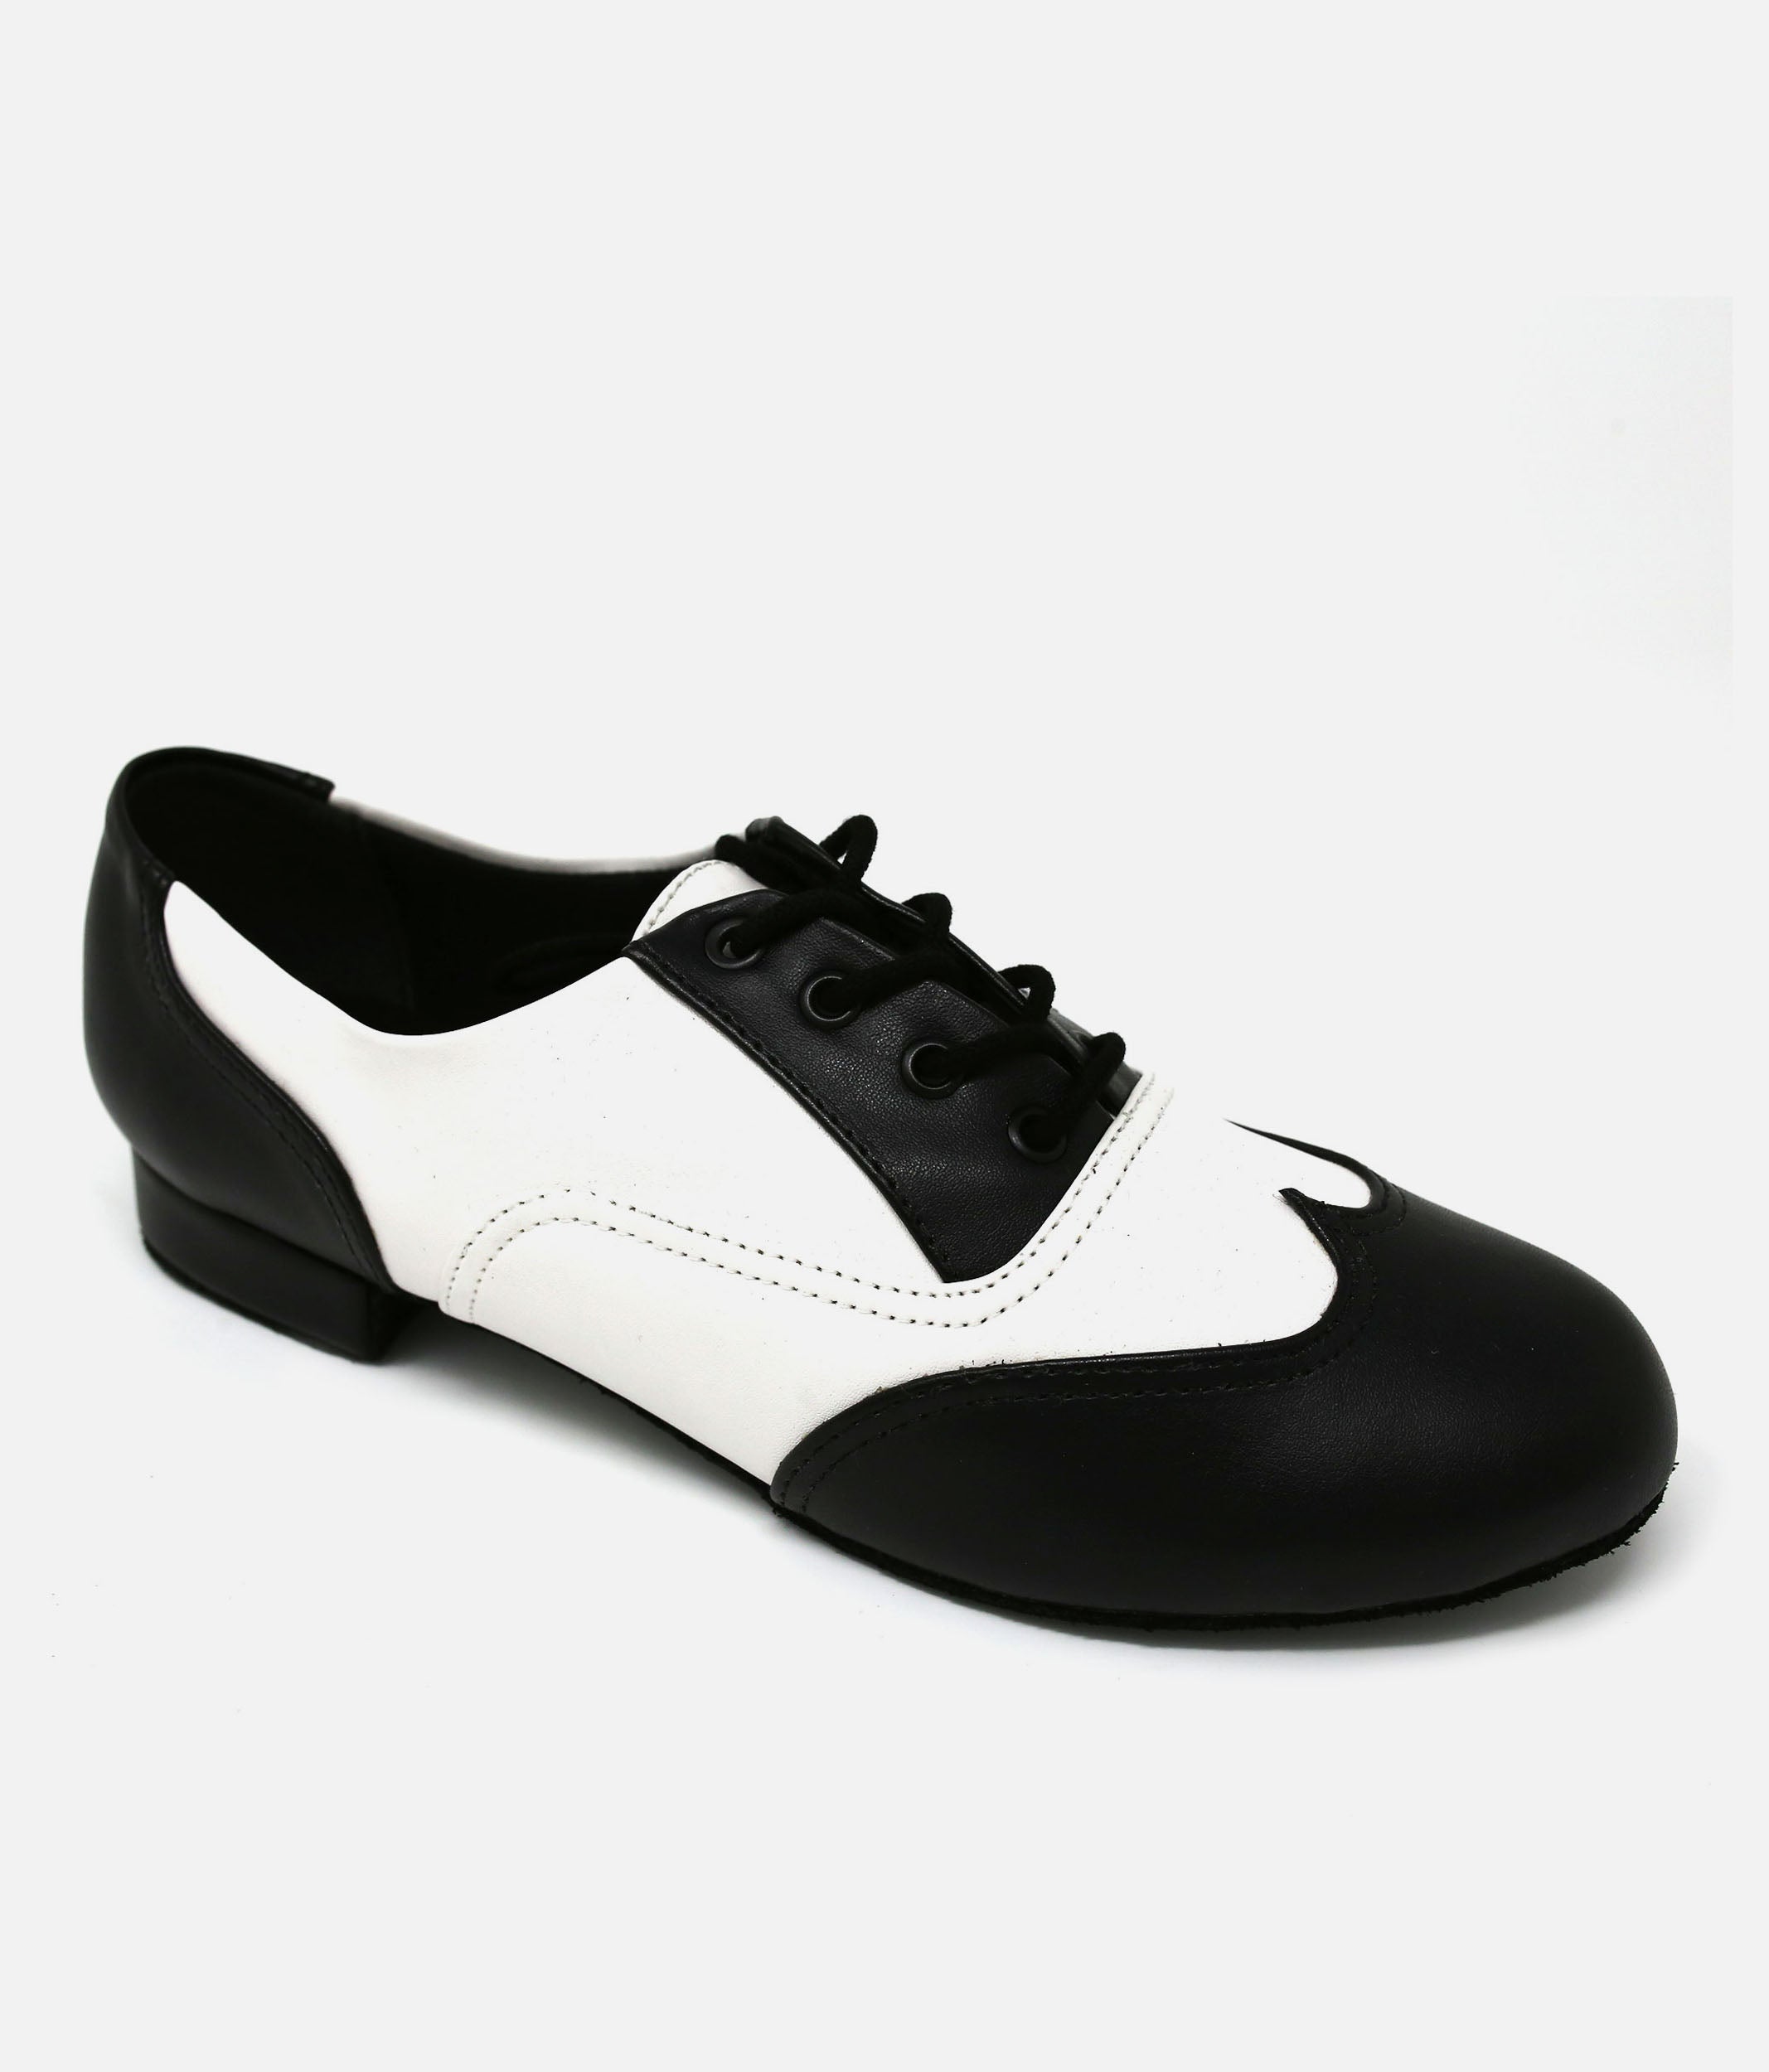 Practice Ballroom Shoes, Oxford Style  - JZ 97